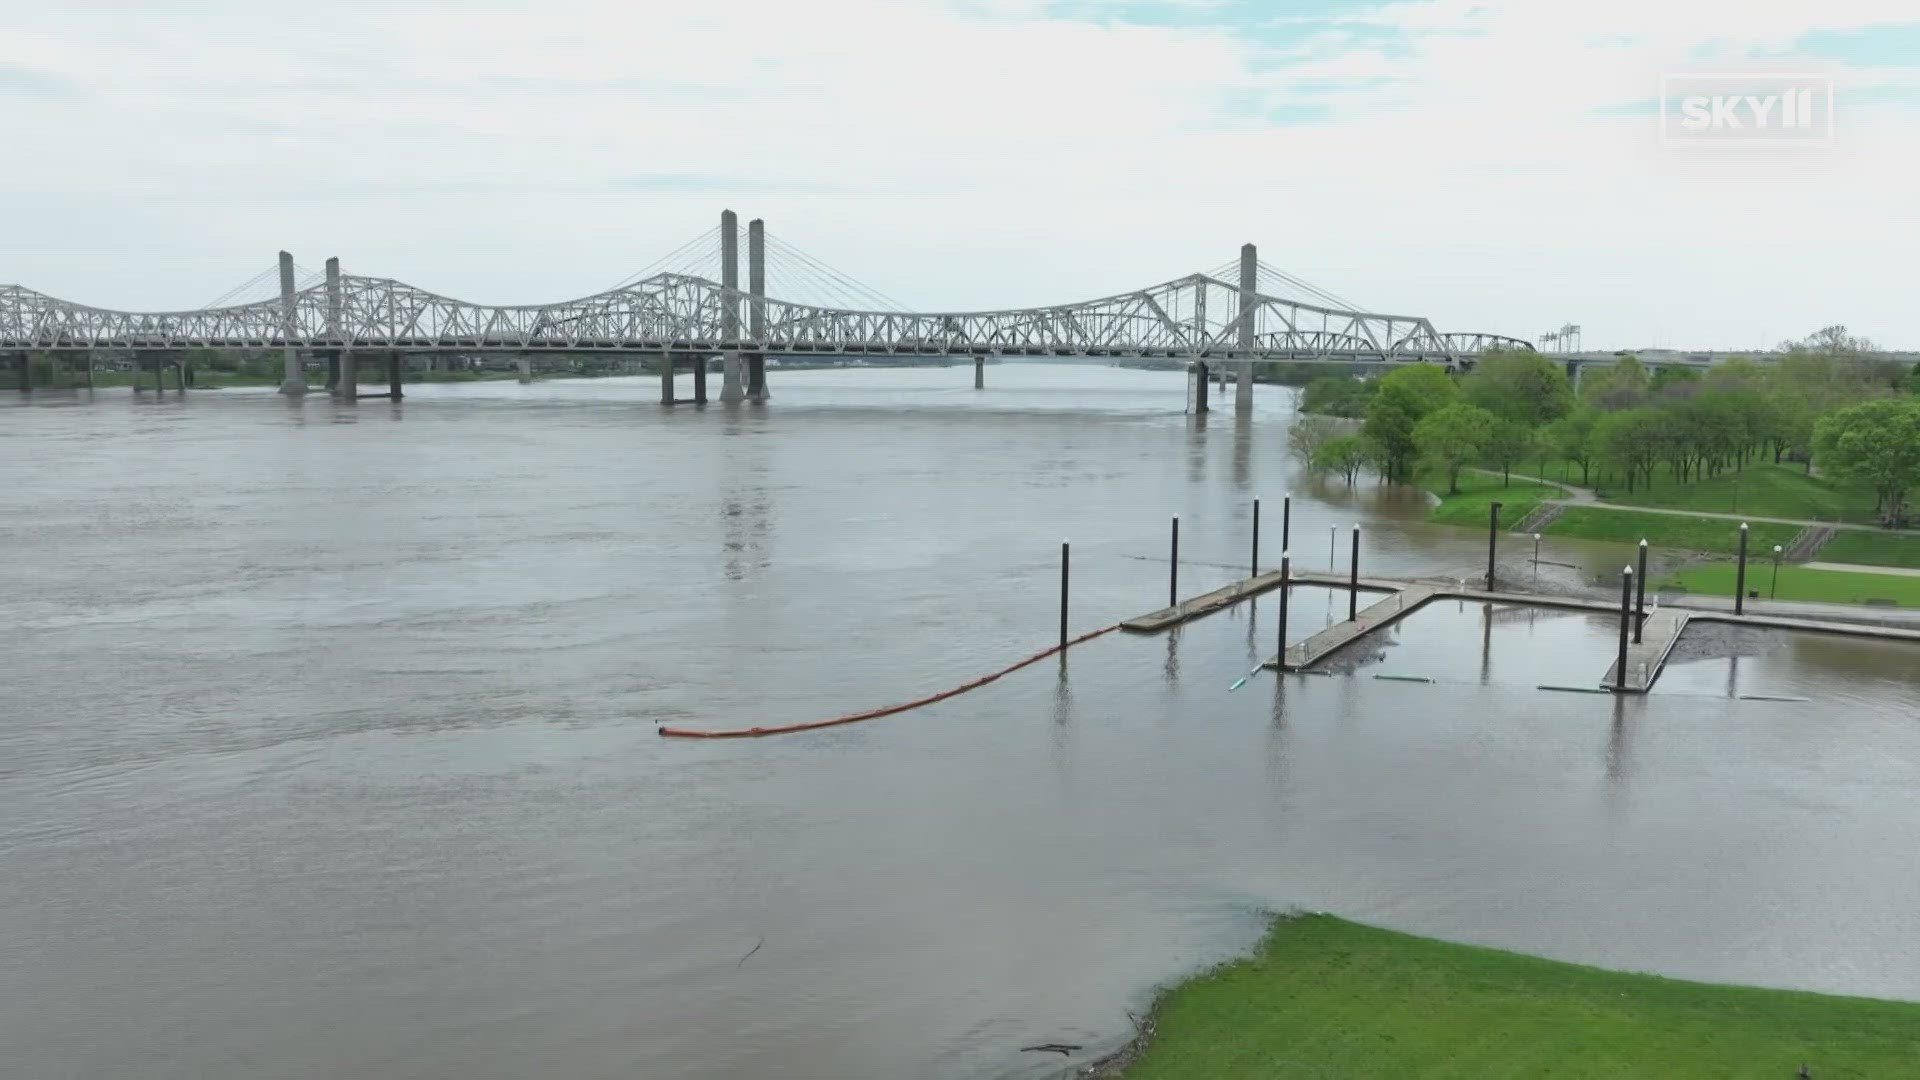 Rising river levels have been a concern this week after several days of rain in Kentucky and southern Indiana.